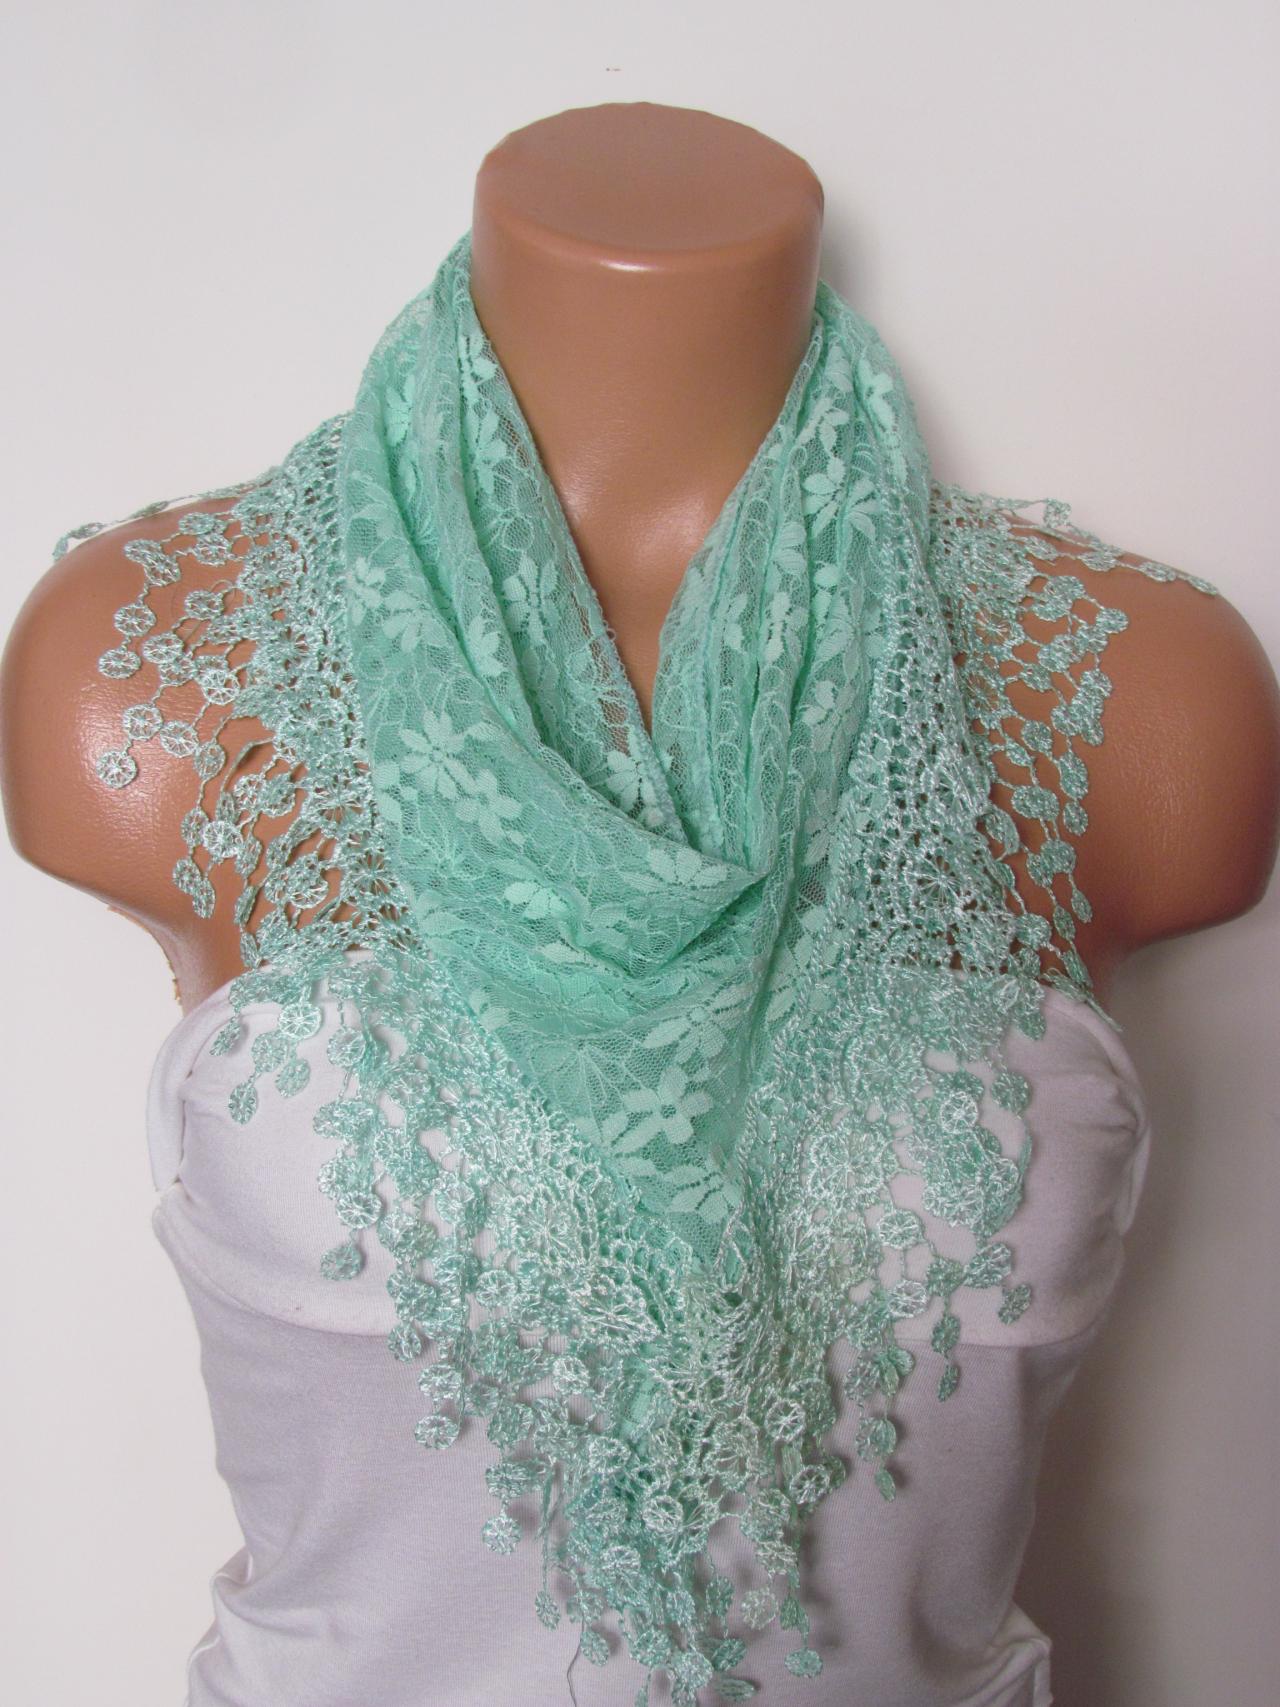 Green Long Scarf With Fringe-Winter Fashion Scarf-Headband-Necklace- Infinity Scarf- Winter Accessory-Long Scarf